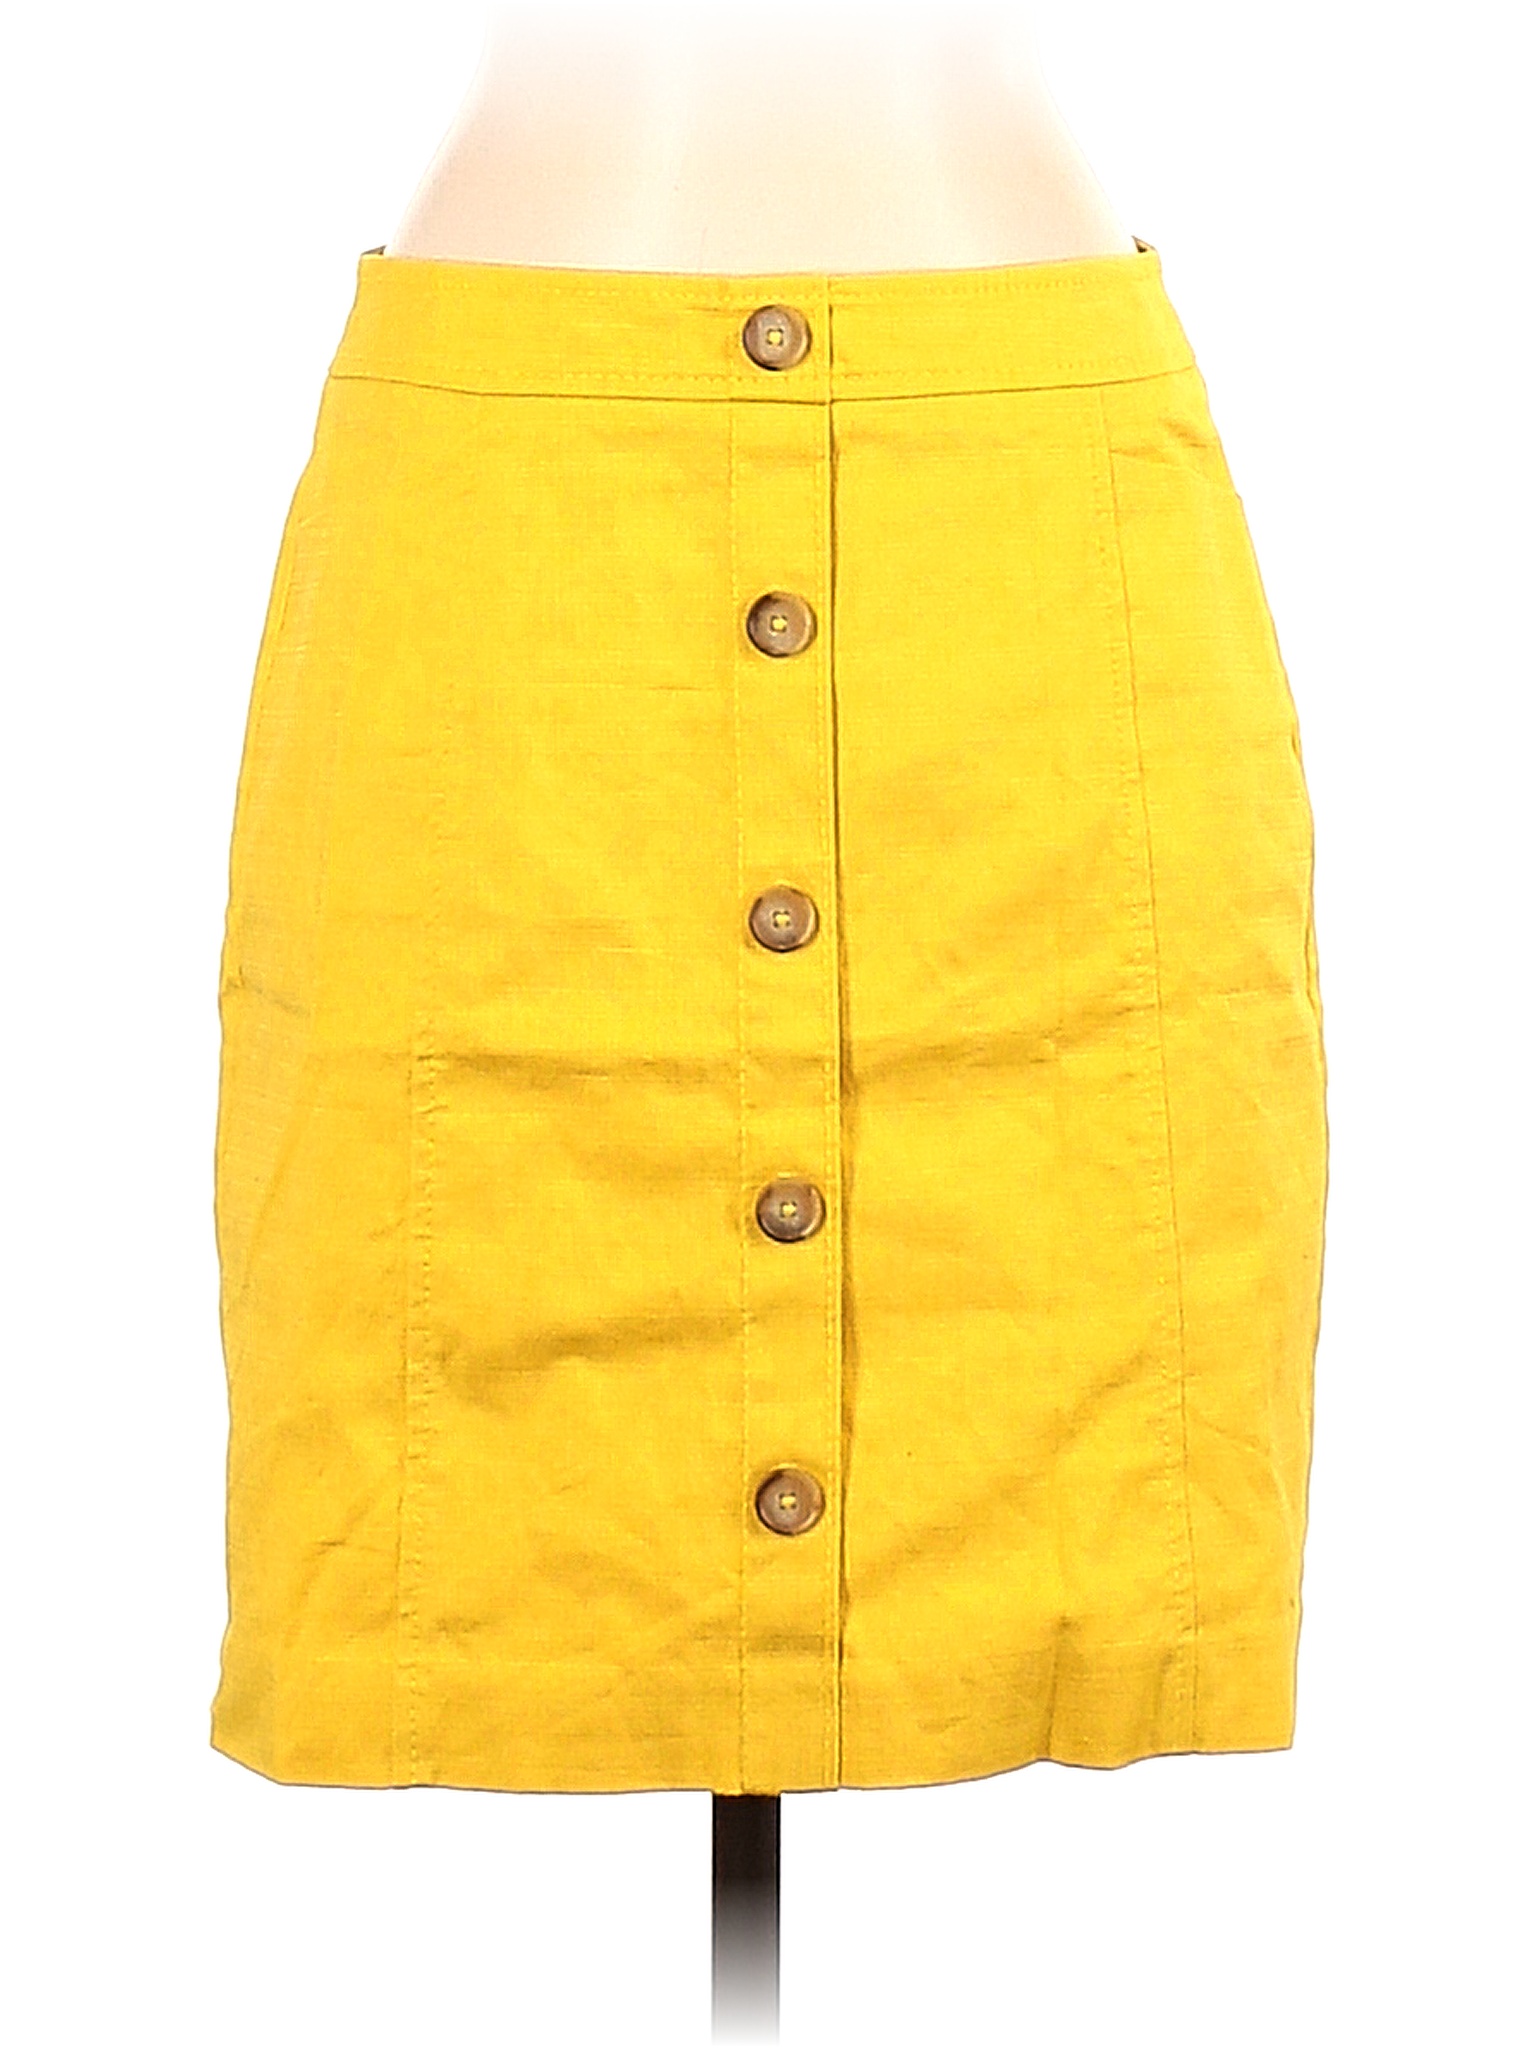 Ann Taylor LOFT Solid Colored Yellow Casual Skirt Size 4 - 82% off ...